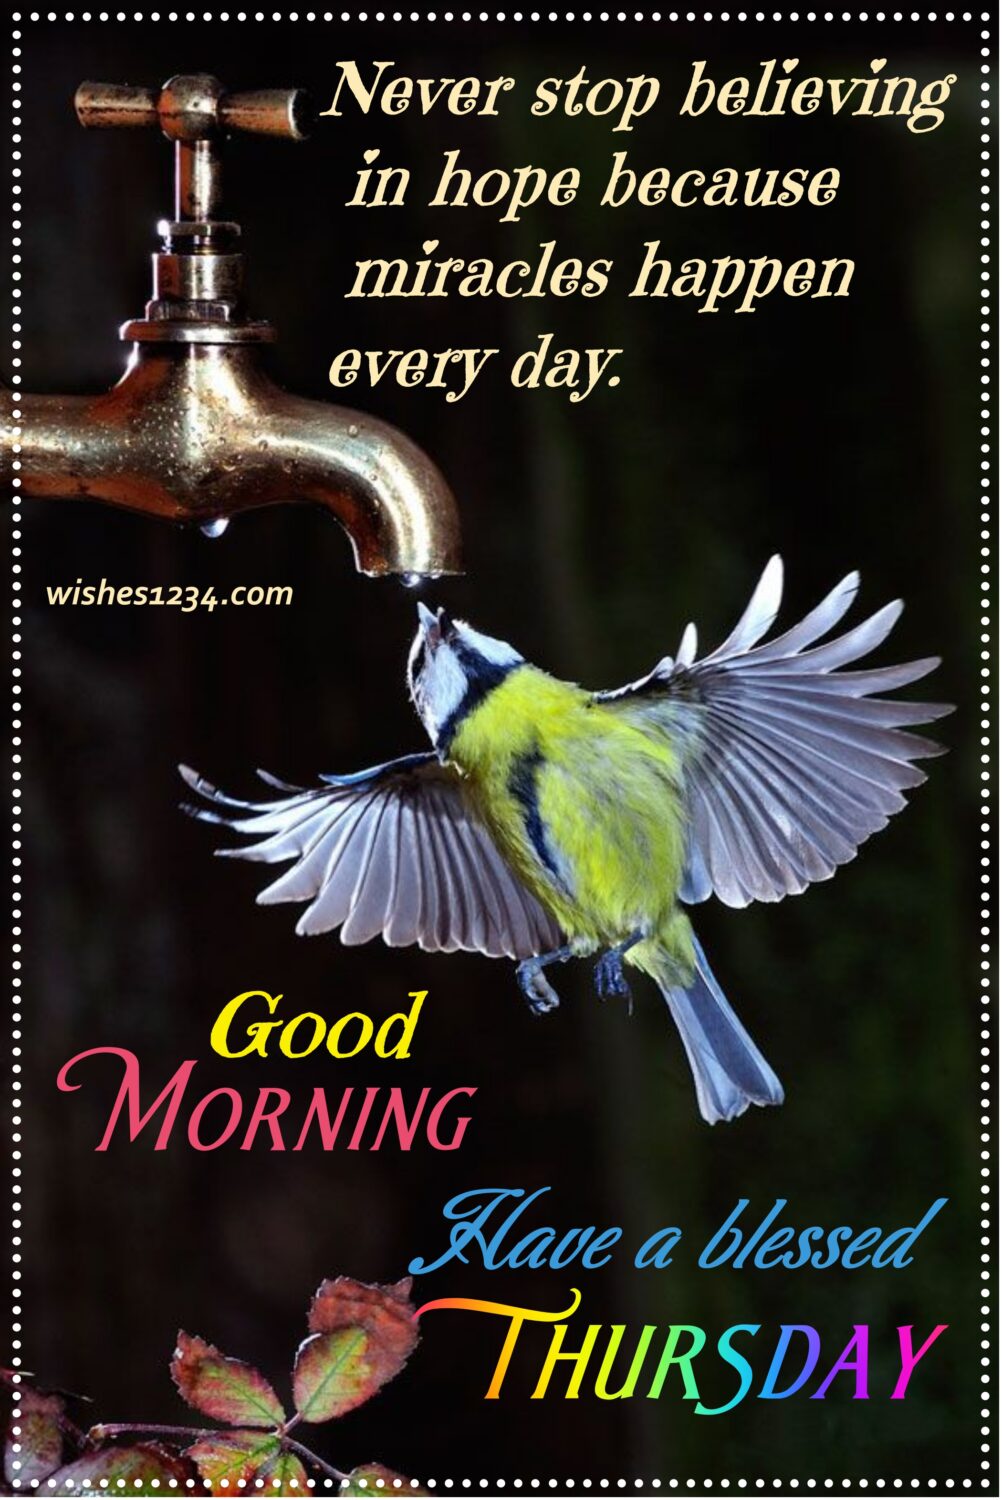 A bird try to drink water from tap, Motivational Thursday quotes.